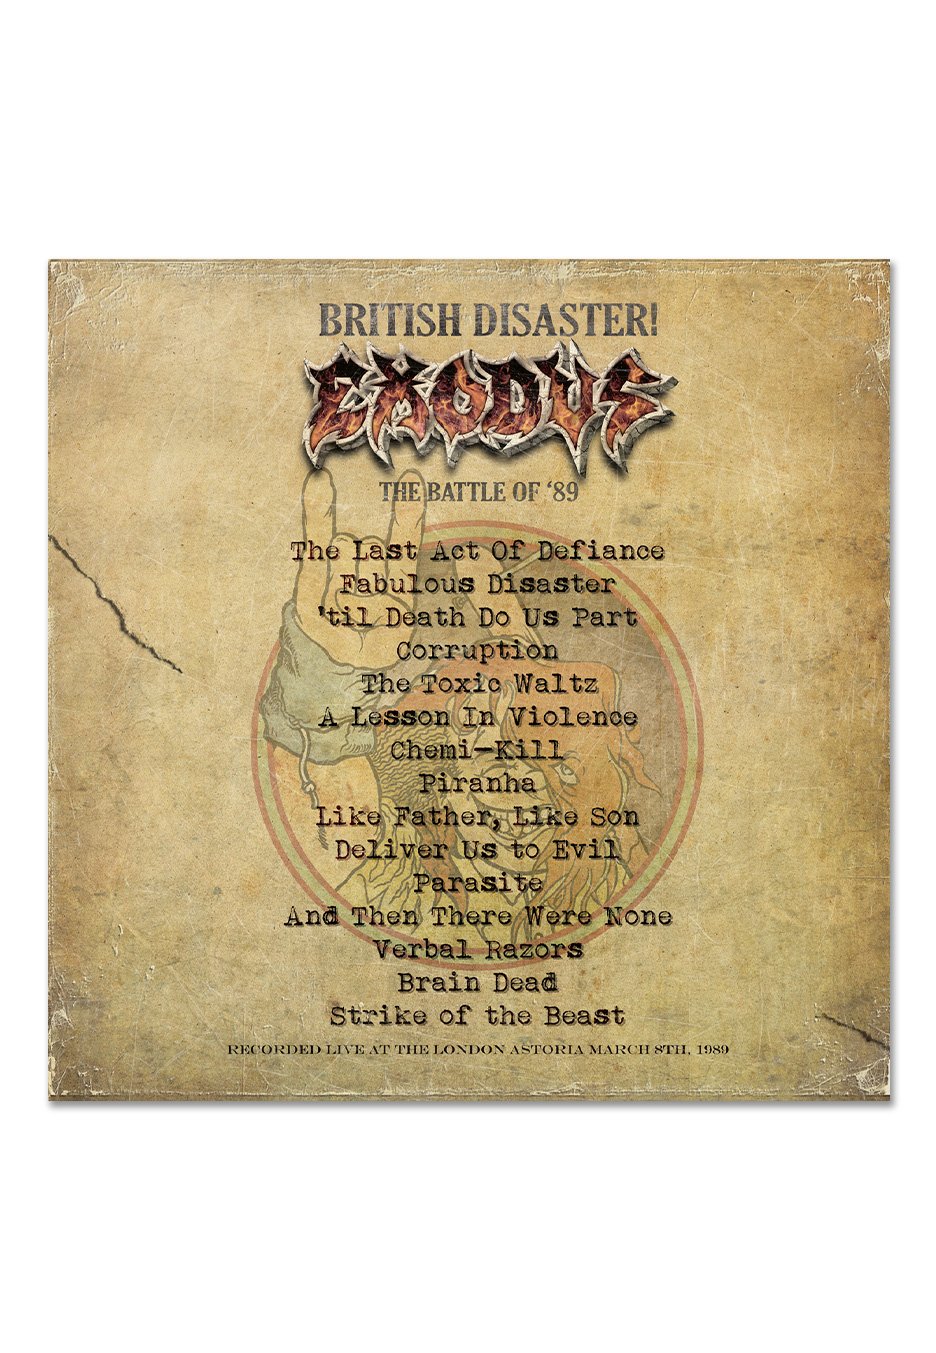 Exodus - British Disaster: The Battle Of '89 (Live At The Astoria) - CD | Neutral-Image